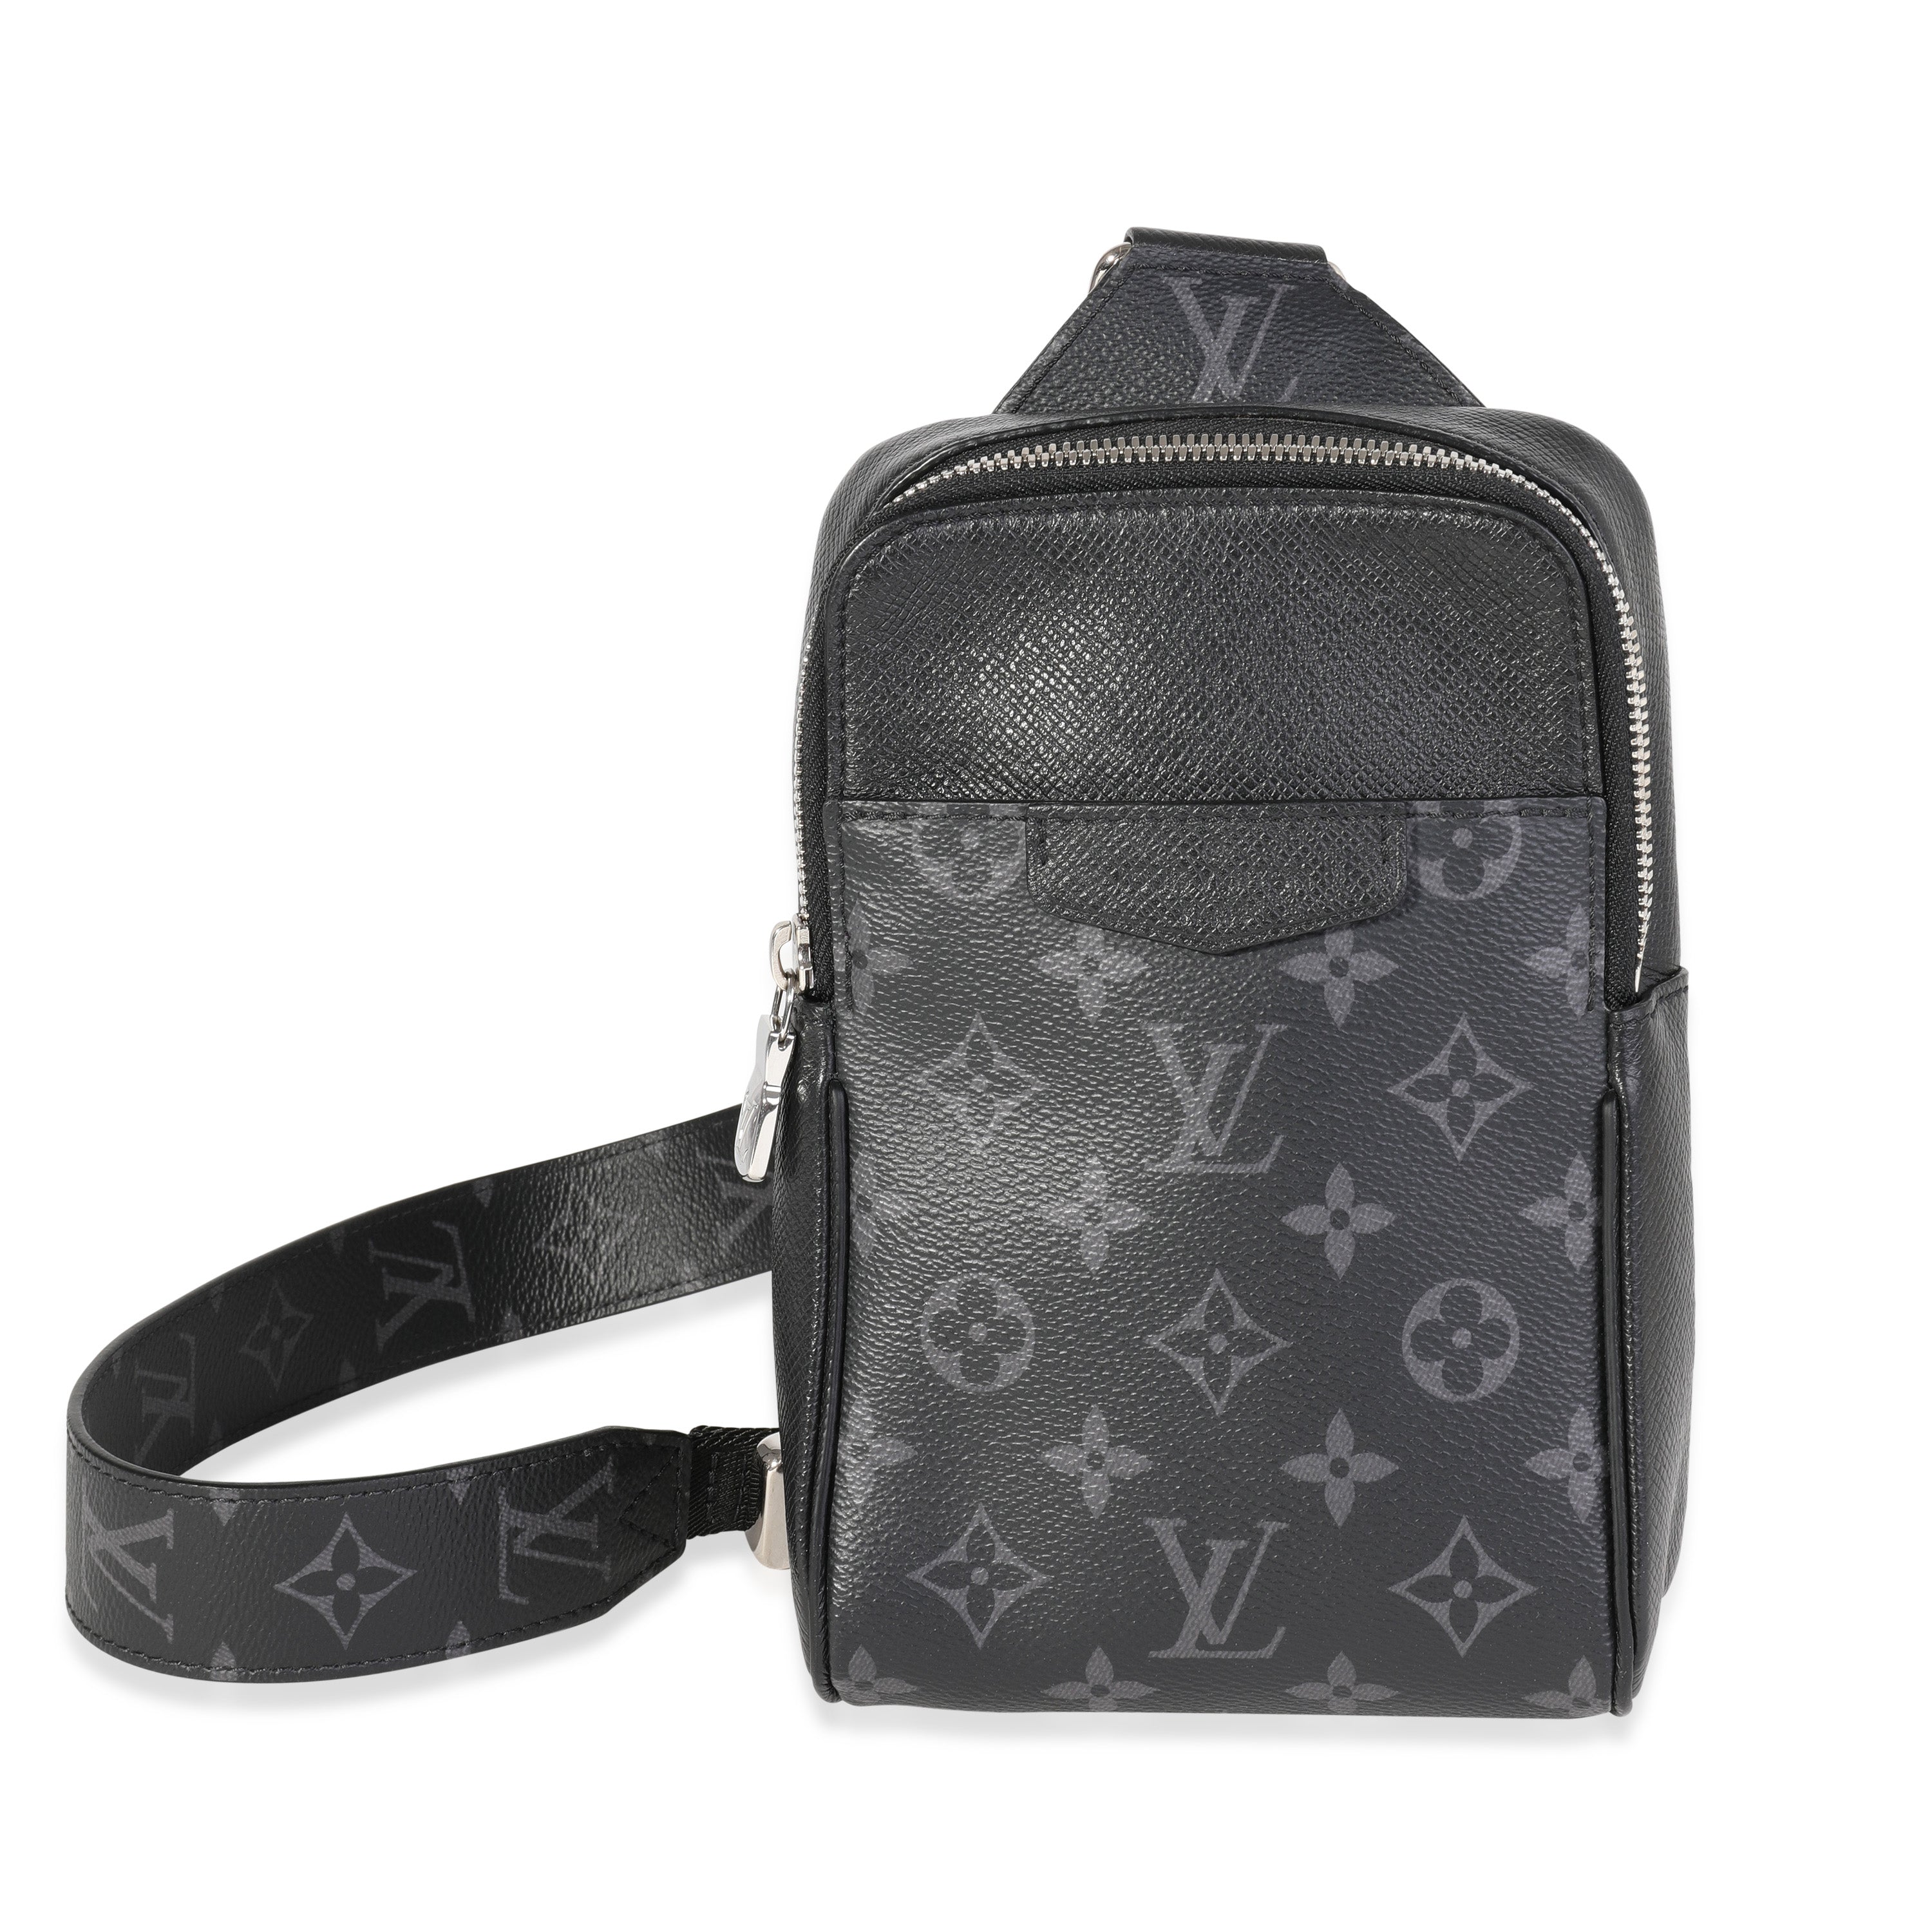 What fits in LOUIS VUITTON OUTDOOR SLING BAG 2021, Taigarama Rose